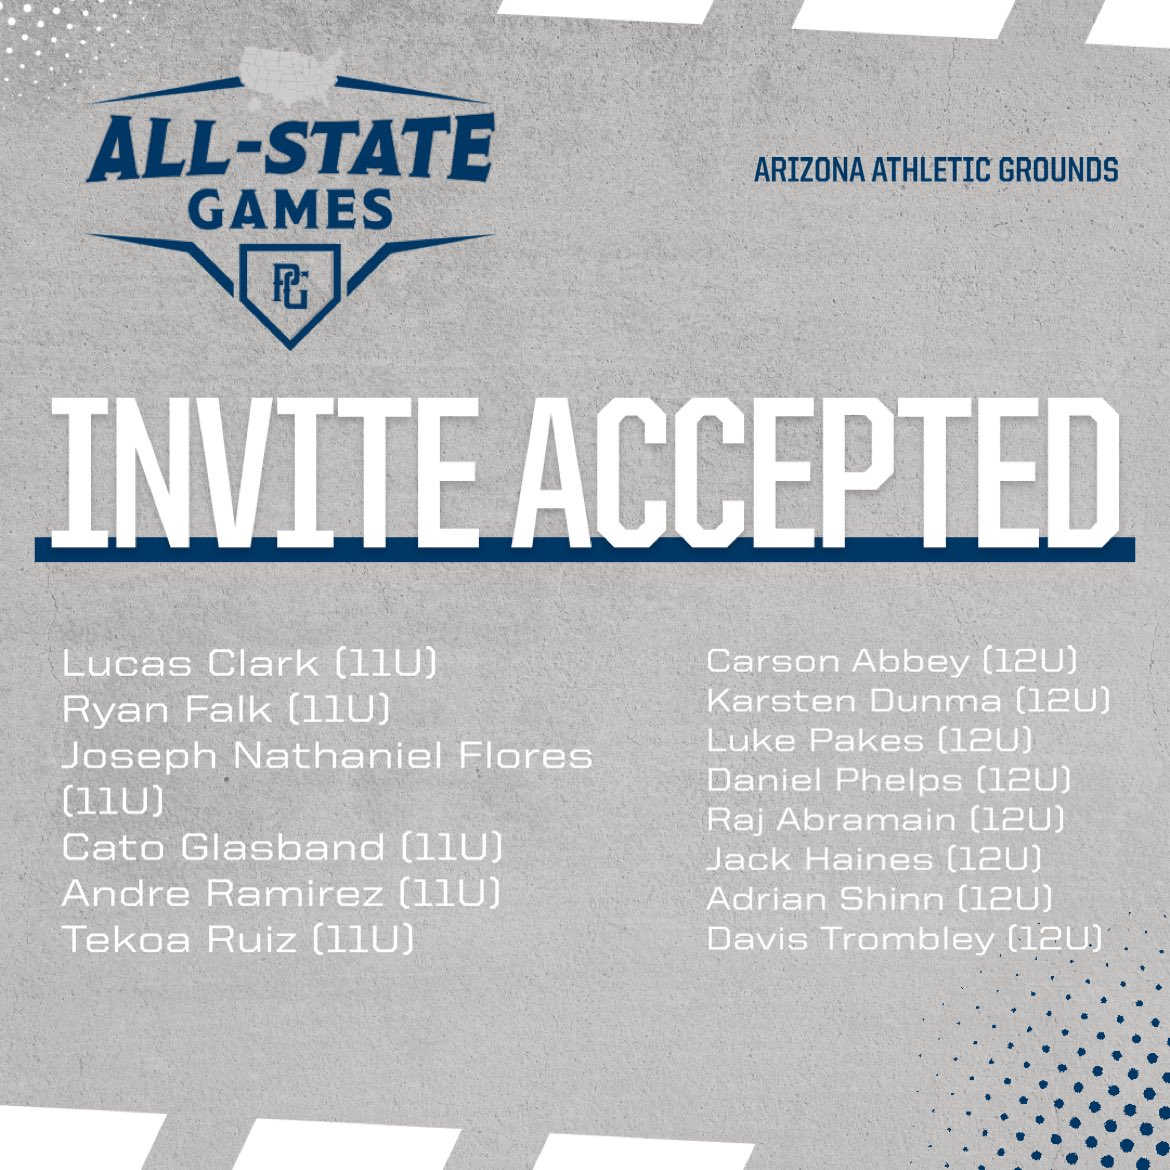 More 11U and 12U players who will be attending the Arizona All-State Games! We look forward to seeing everyone compete in June. 

#perfectgame #pgyouthbb #pgaz